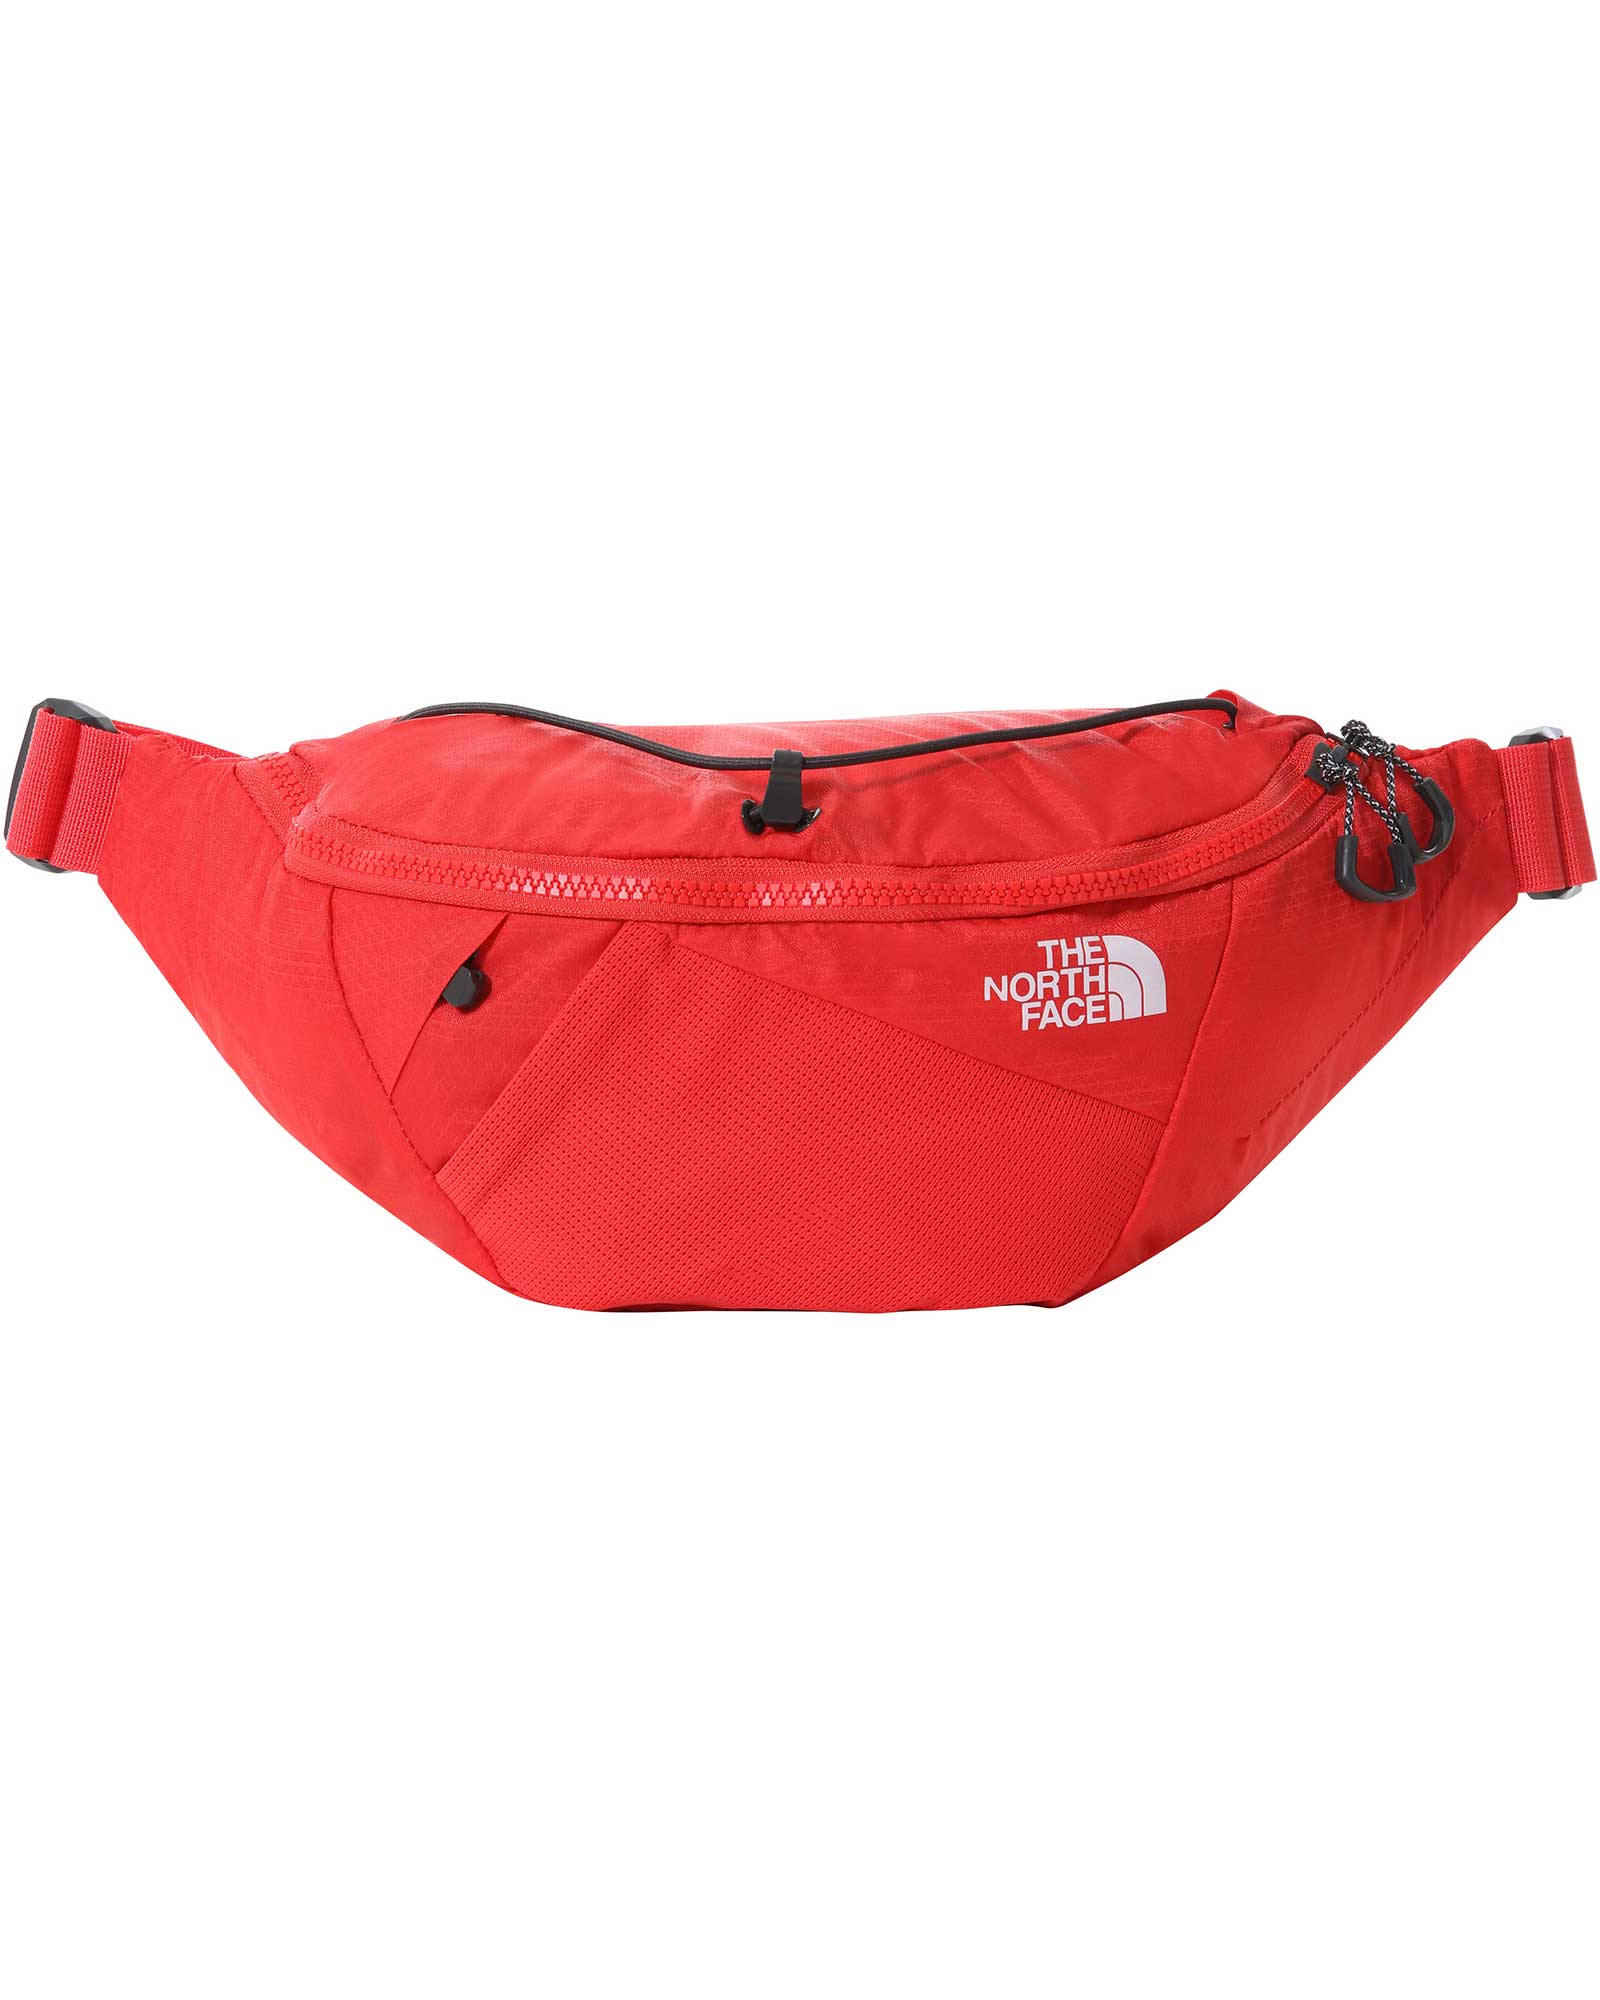 The North Face Lumbnical Hip Pack - Horizon Red/TNF White